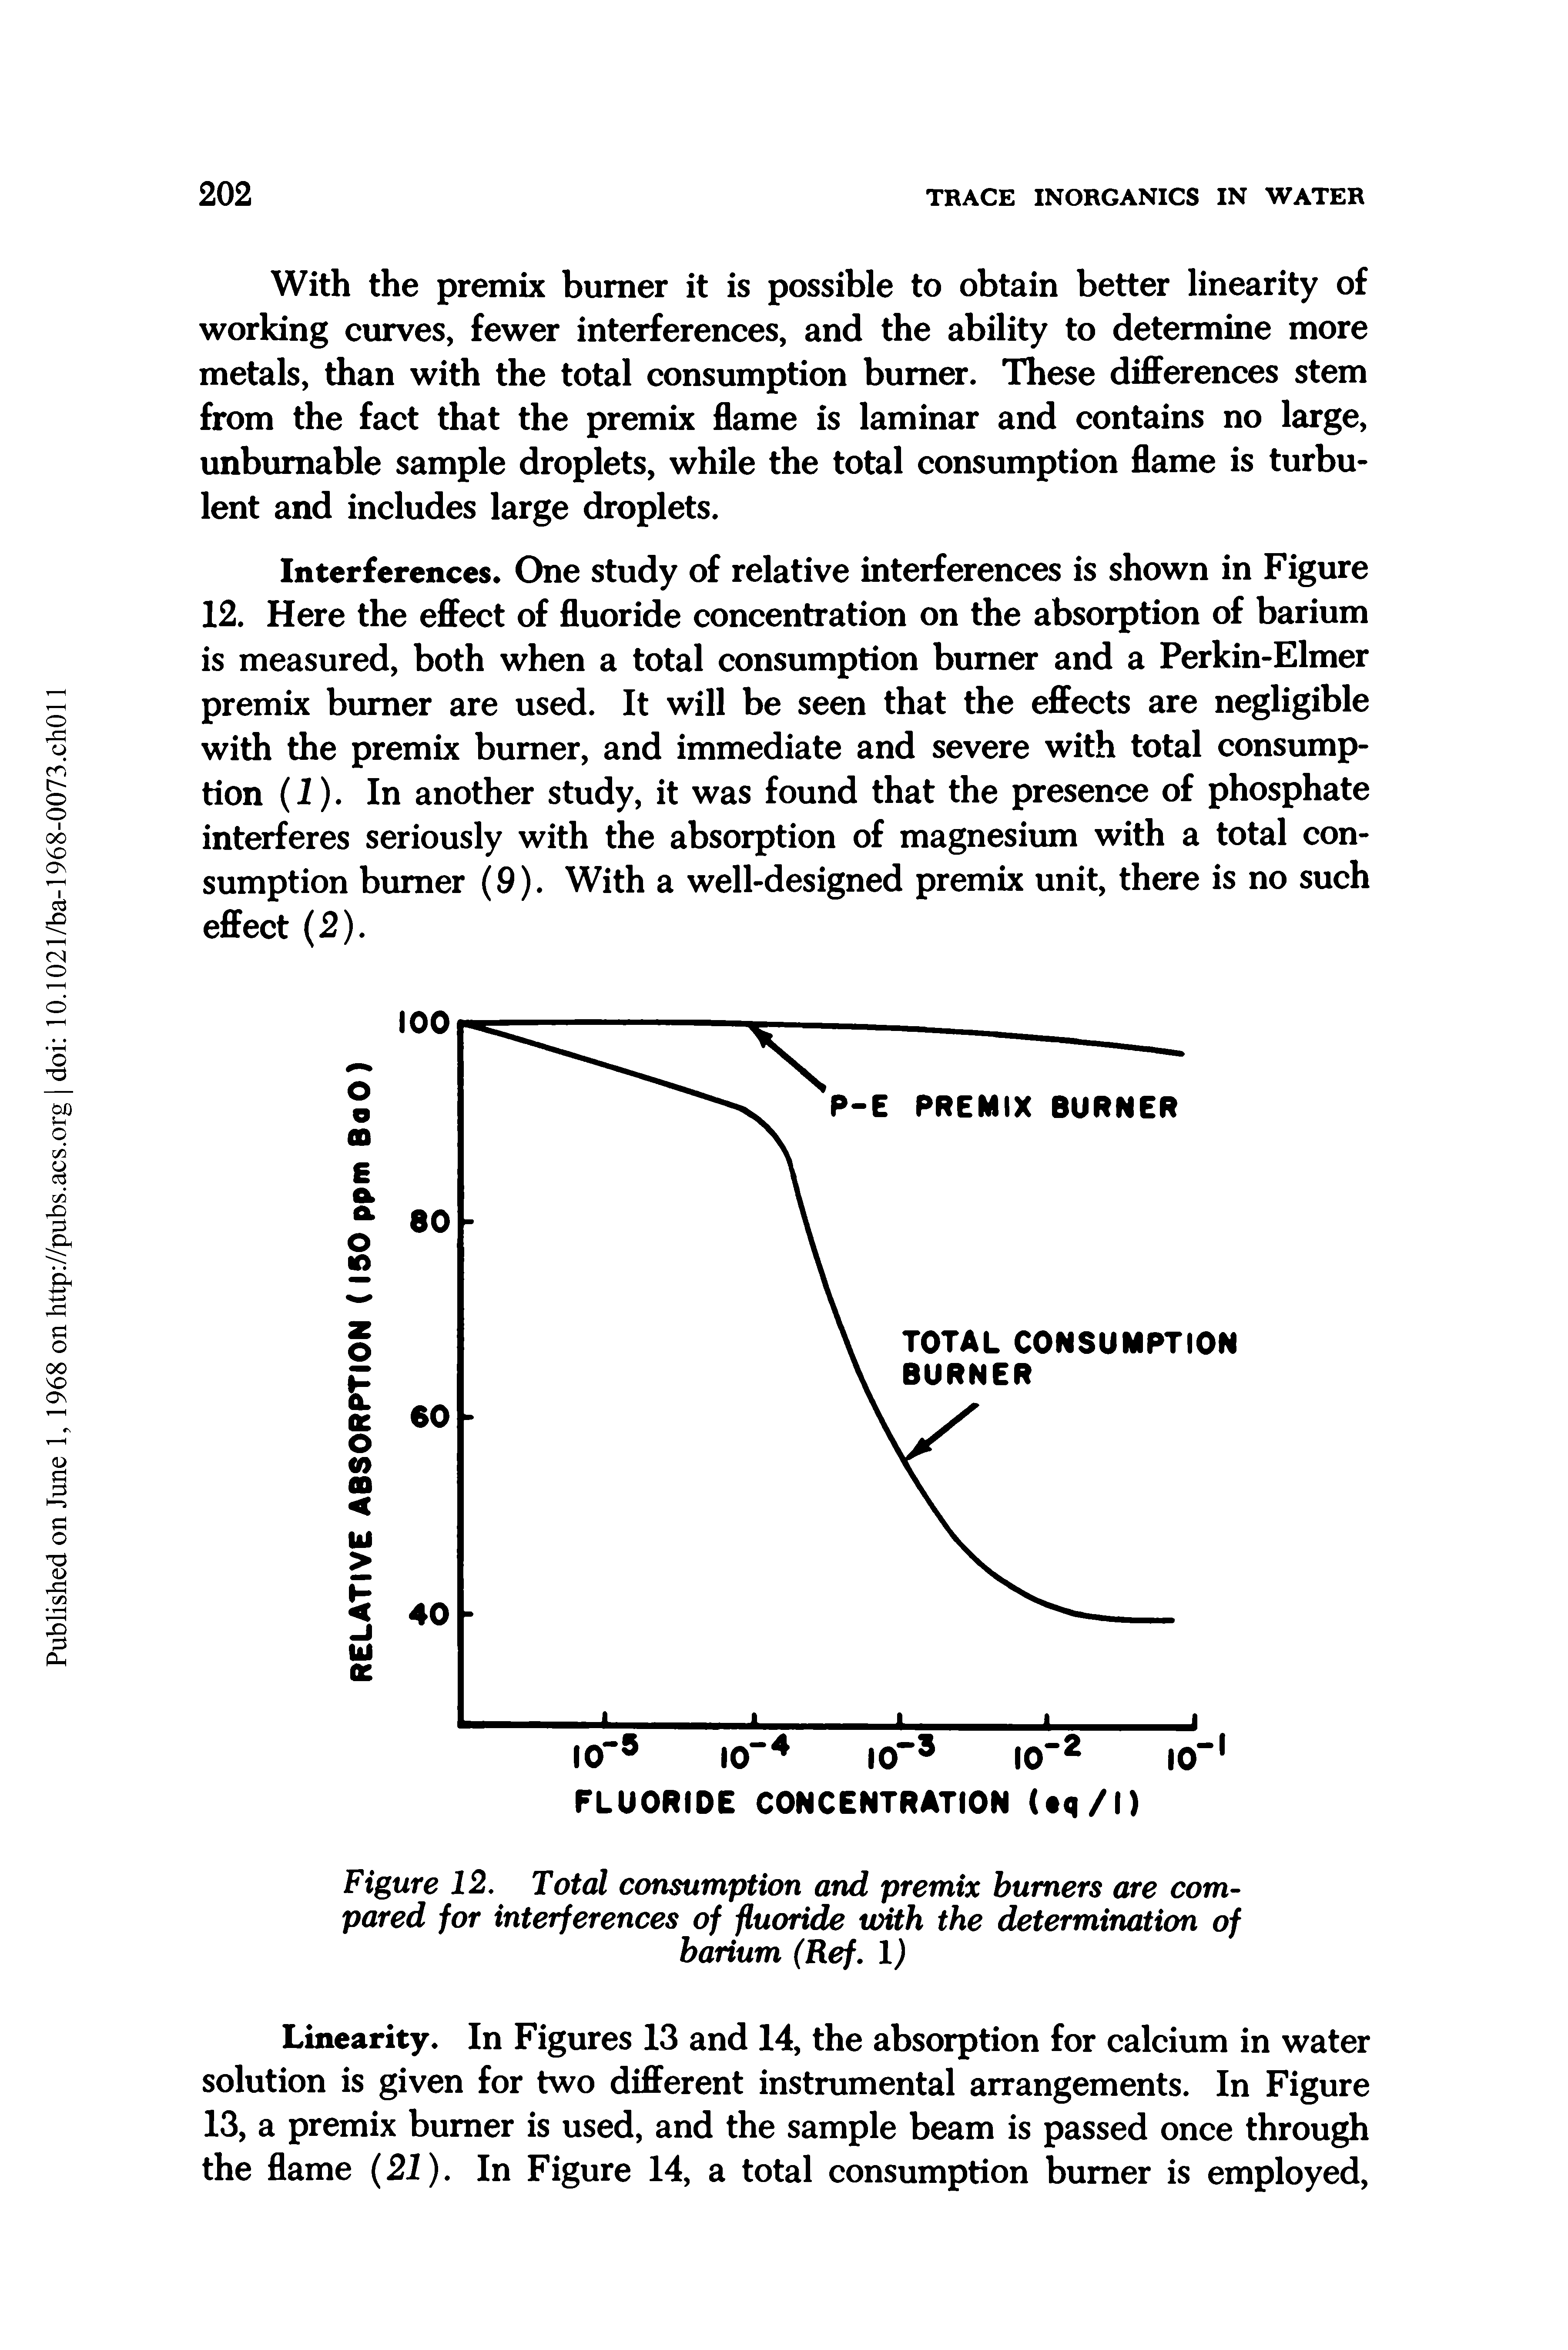 Figure 12, Total consumption and premix burners are compared for interferences of fluoride with the determination of barium (Ref, 1)...